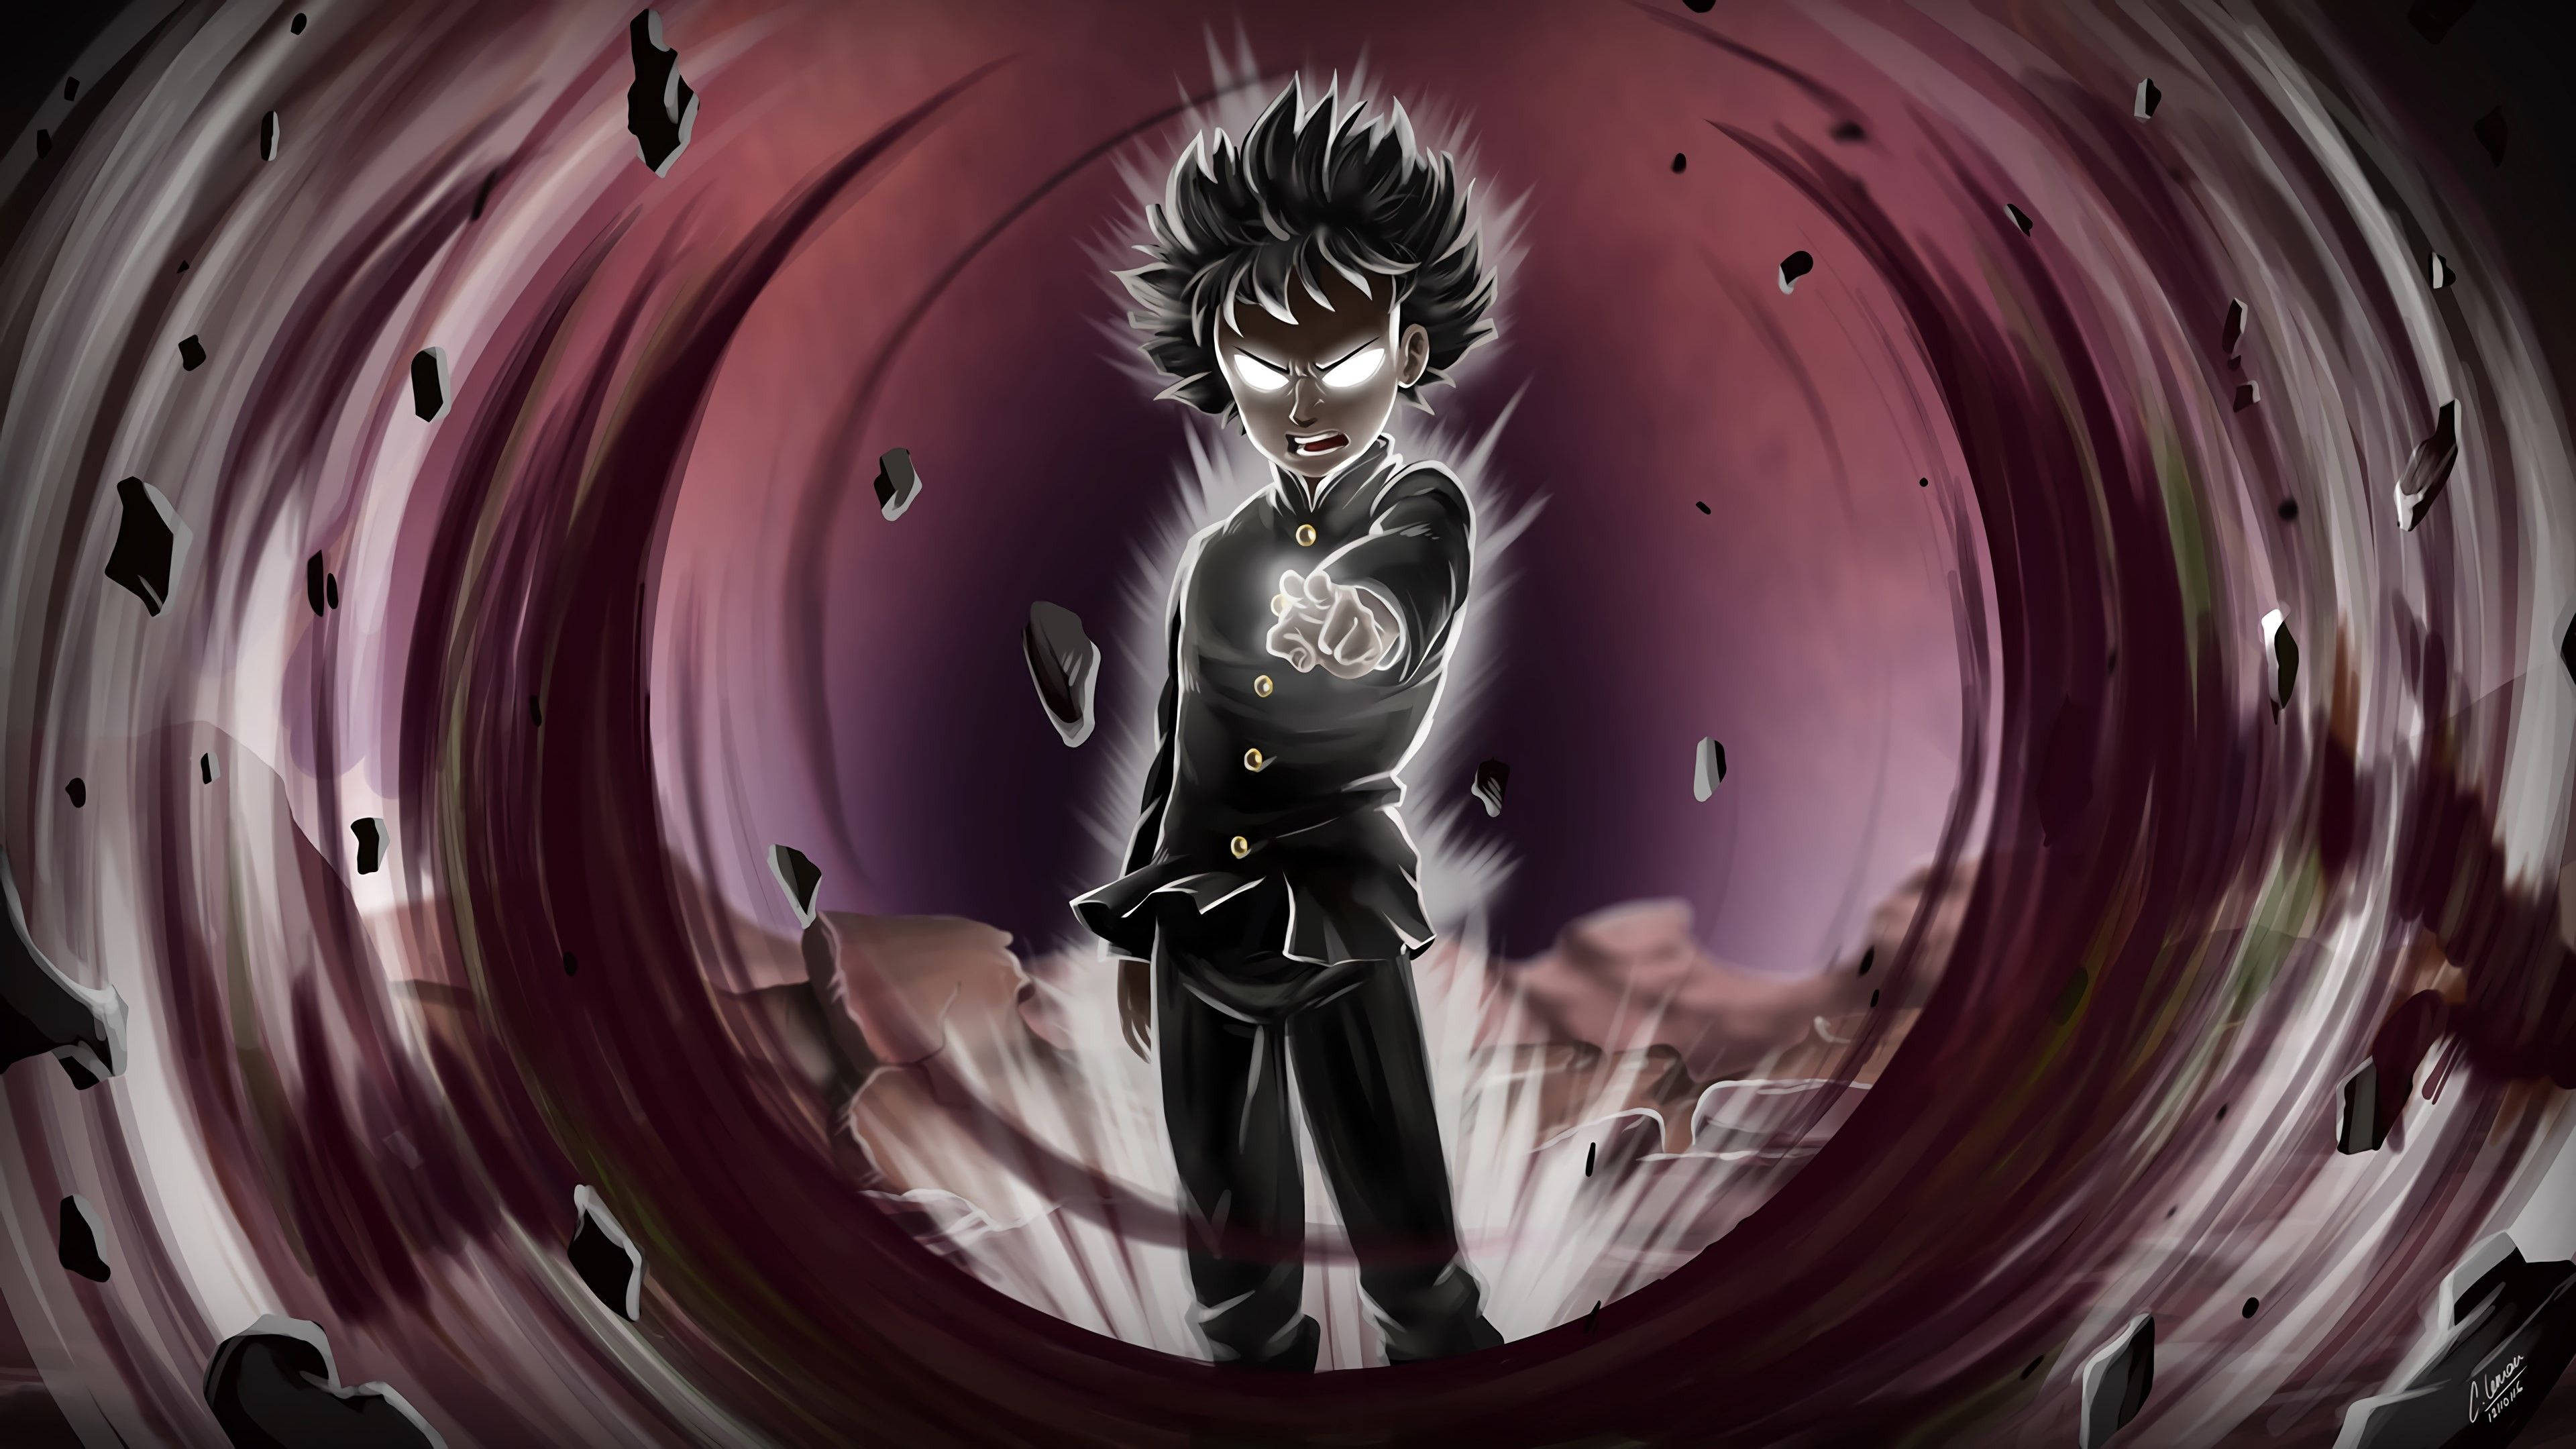 A Black And White Anime Character Standing In A Circular Hole Background